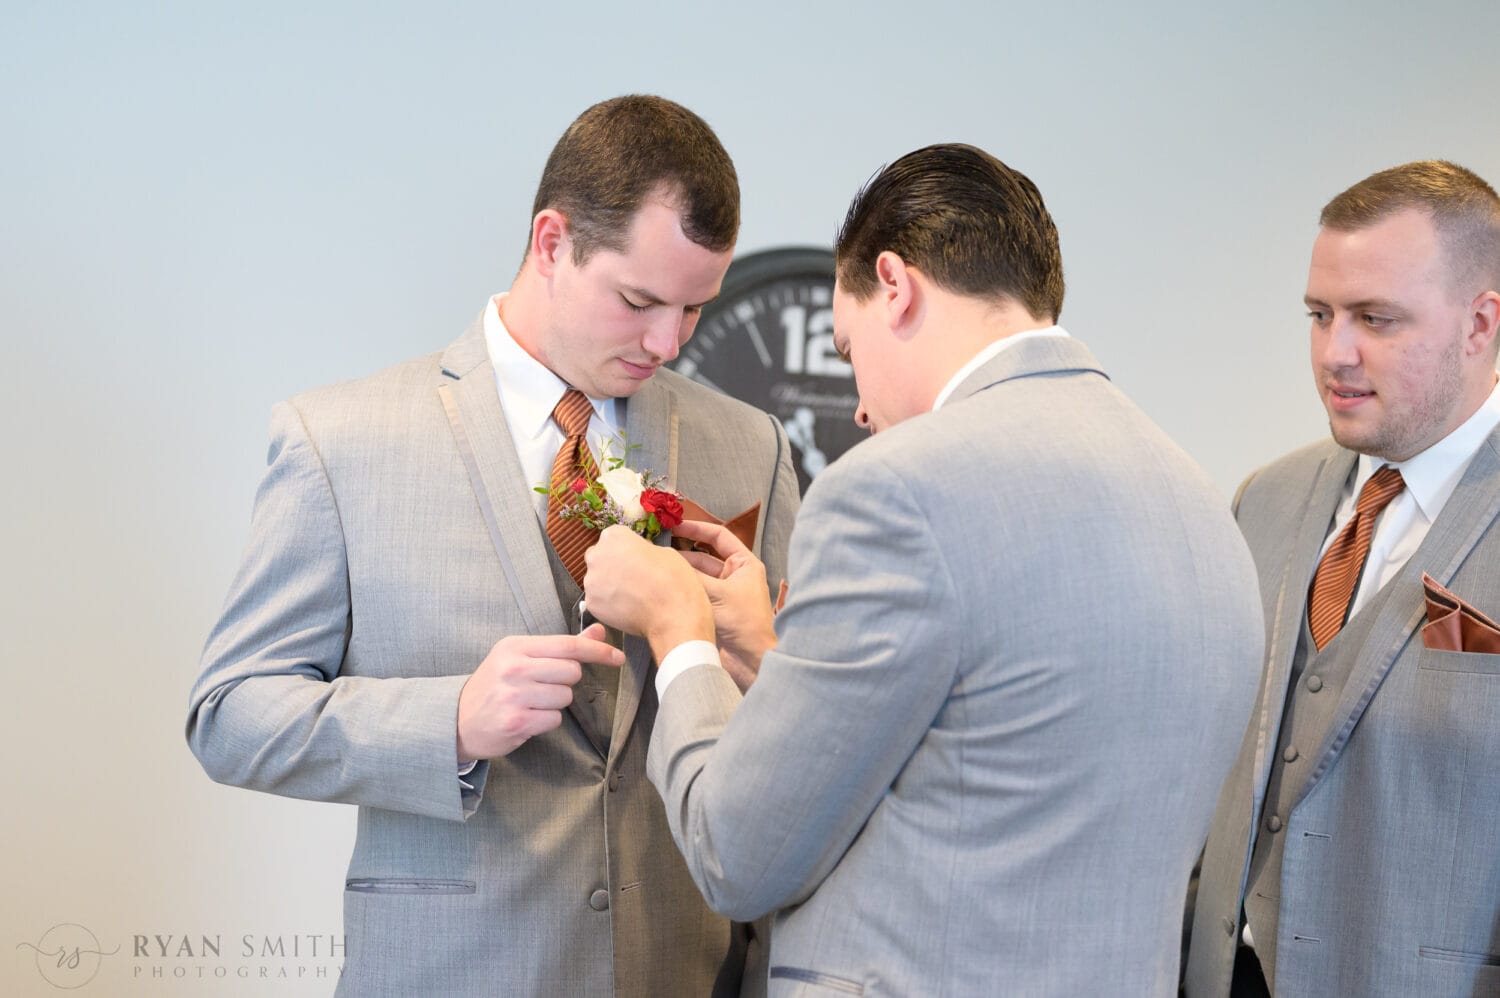 Putting on boutonniere - The Blessed Barn